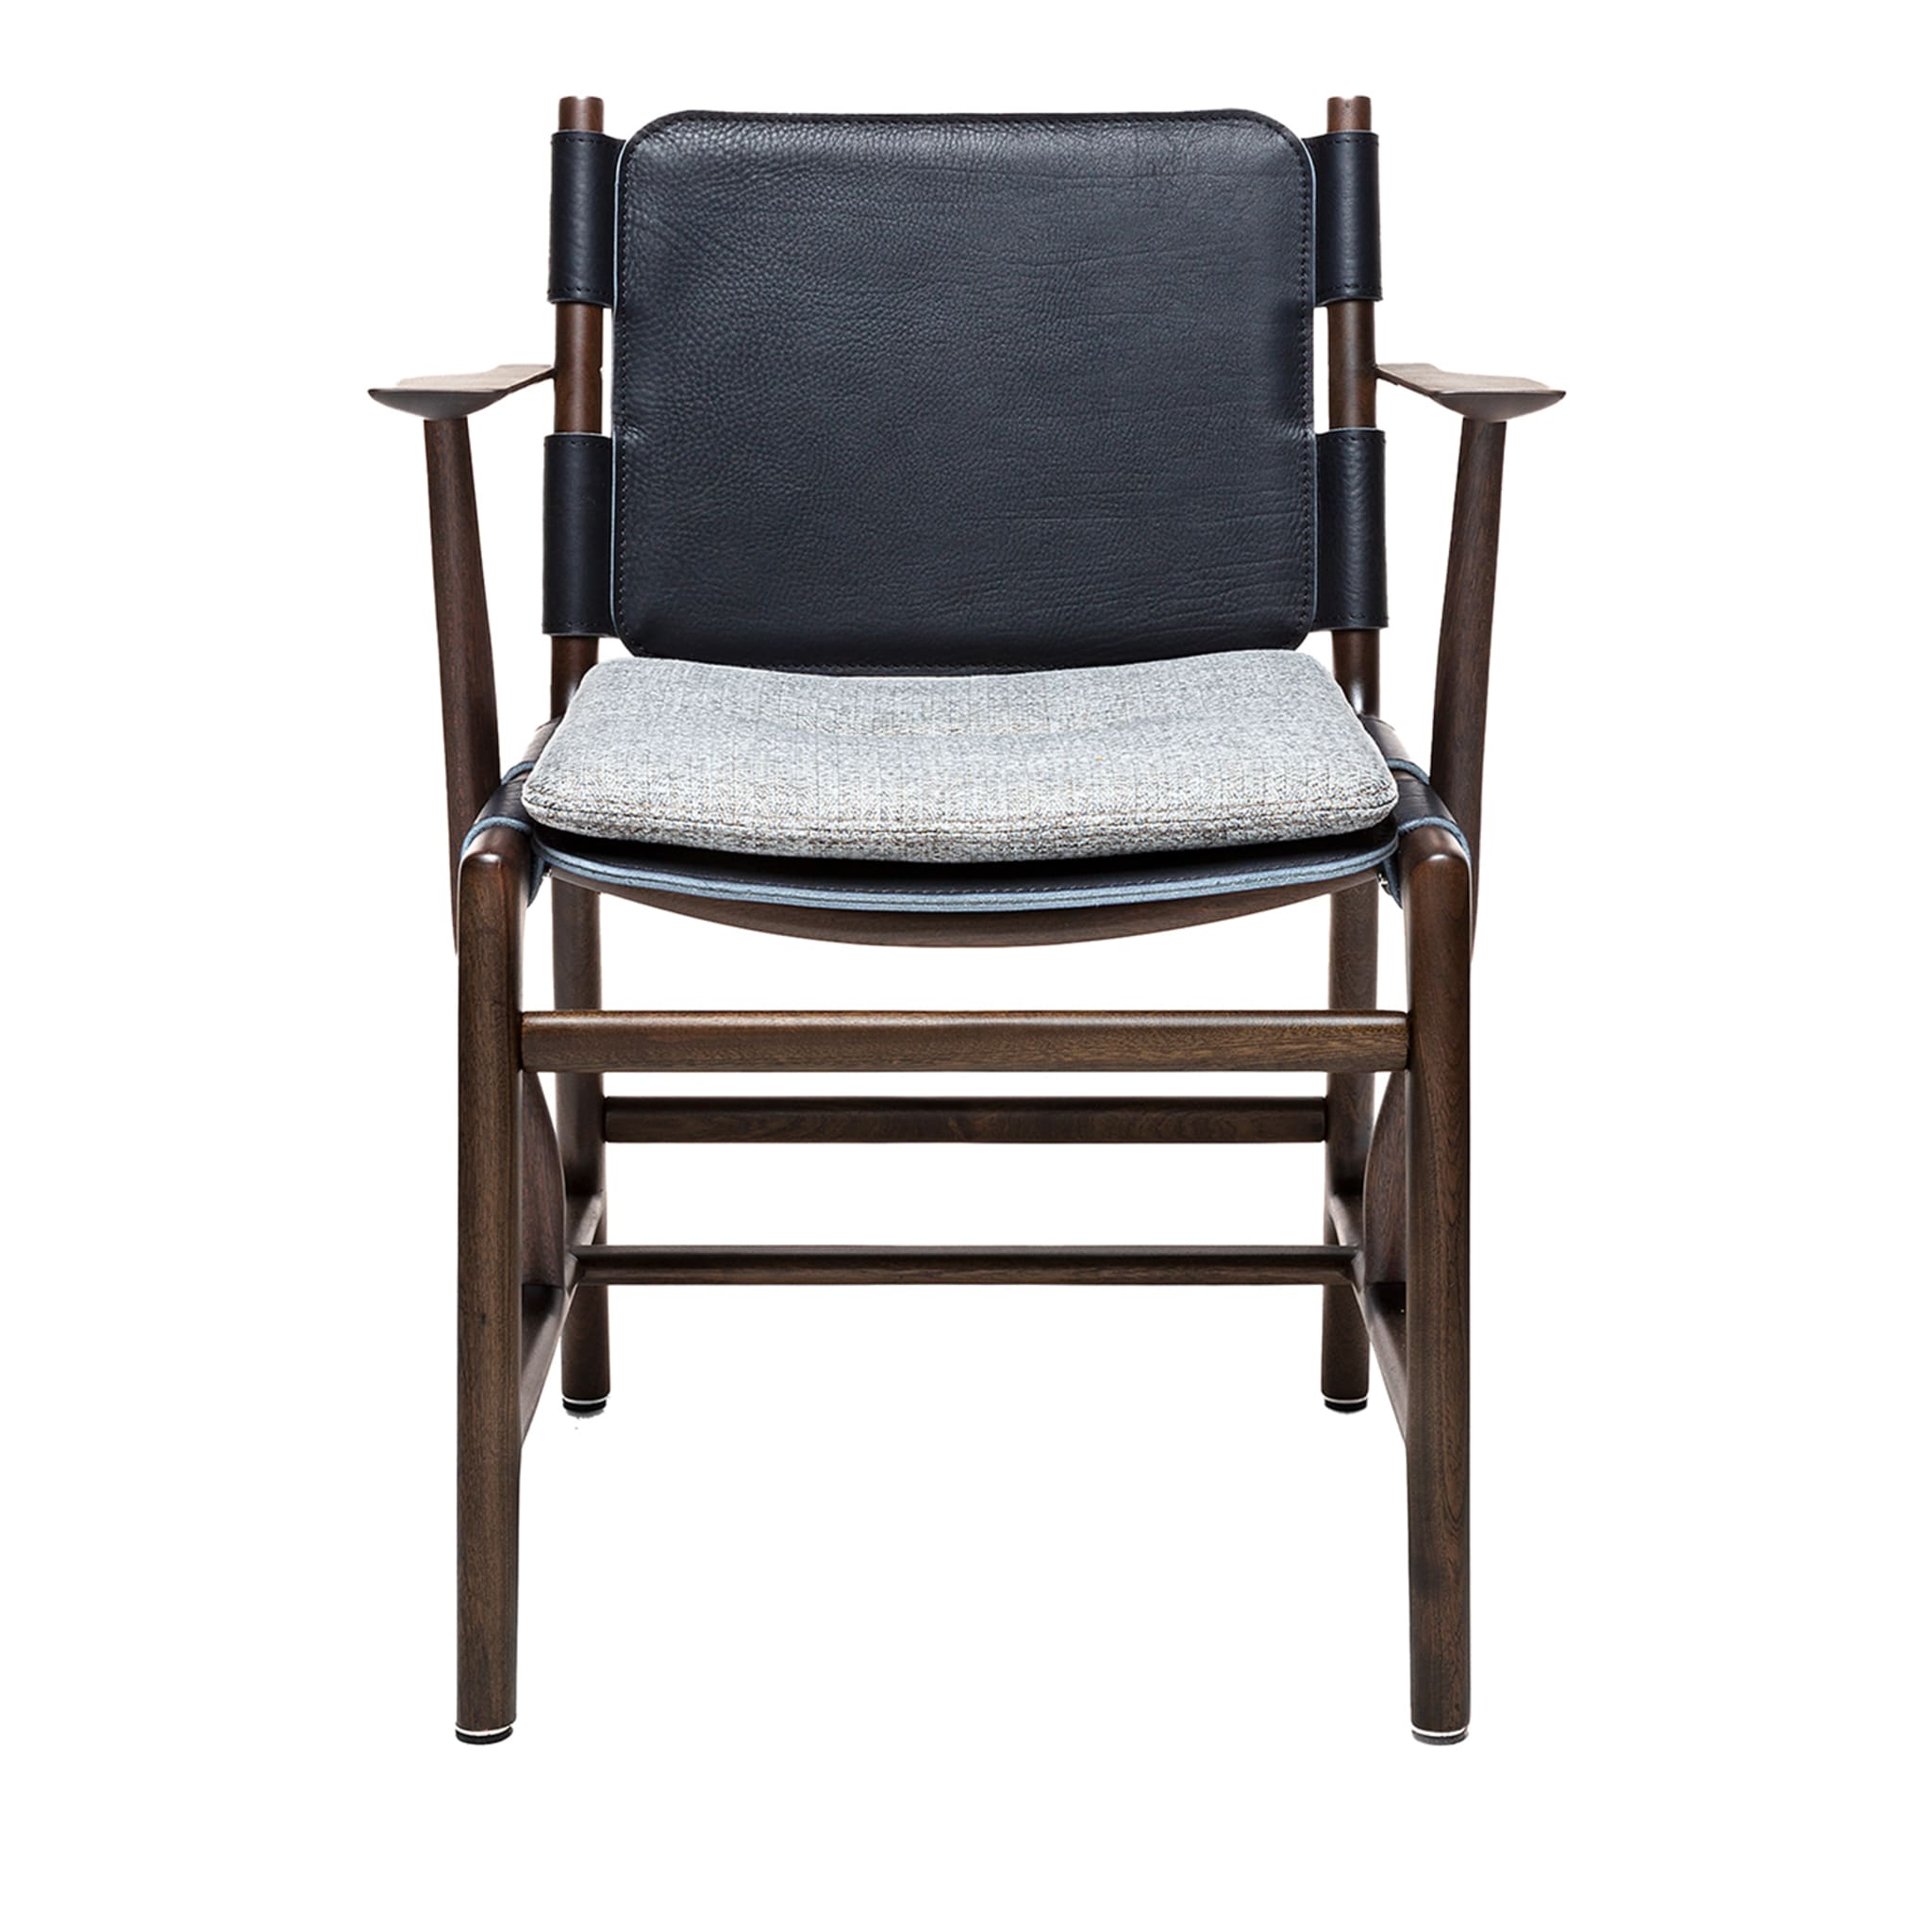 Levante Dark Chair with Armrests by Massimo Castagna - Main view